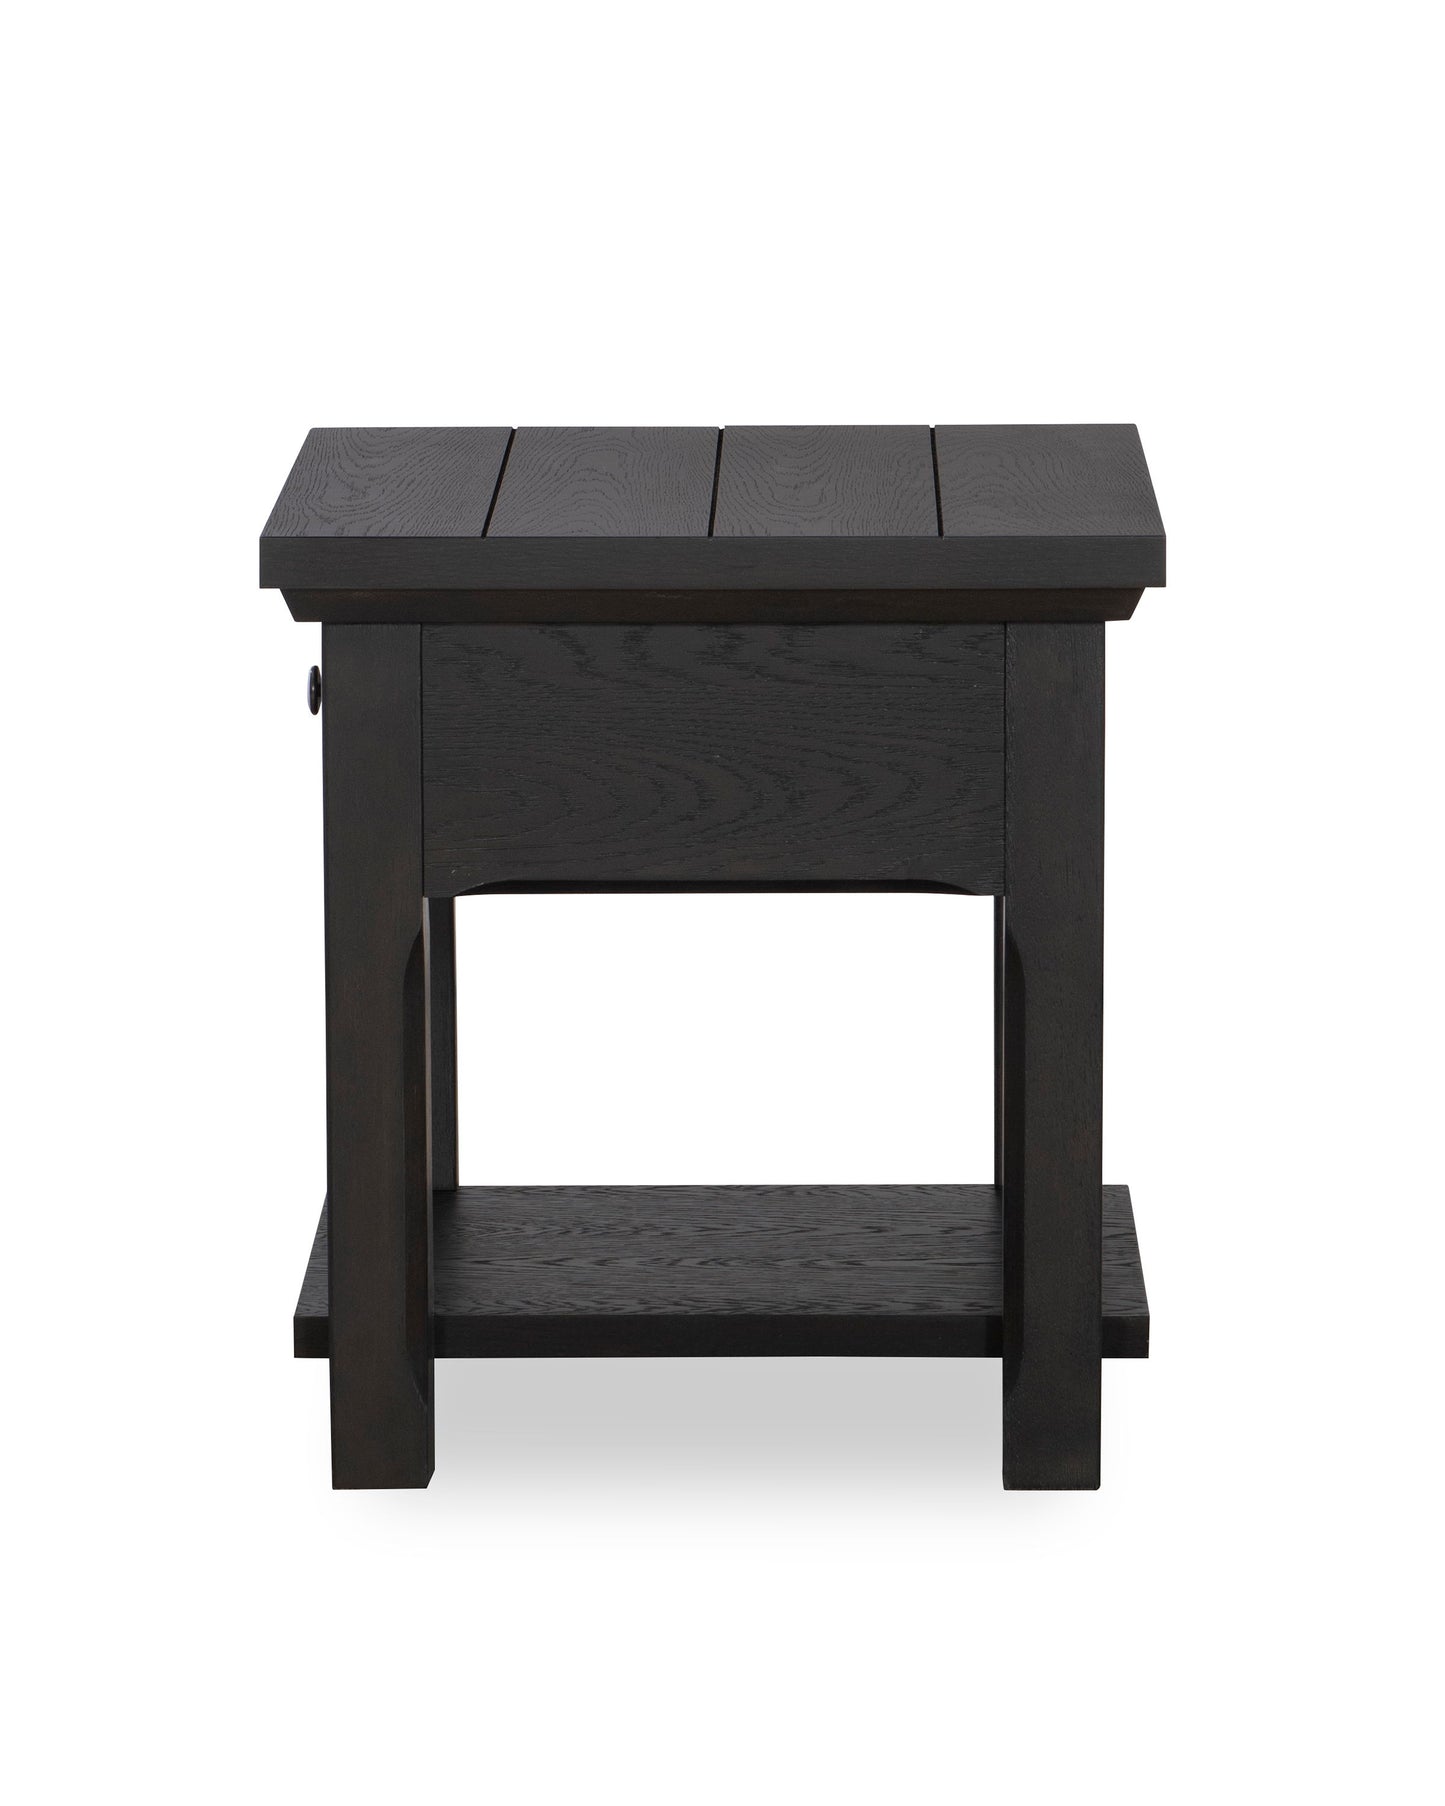 Westcliff - End Table with Drawer - Black